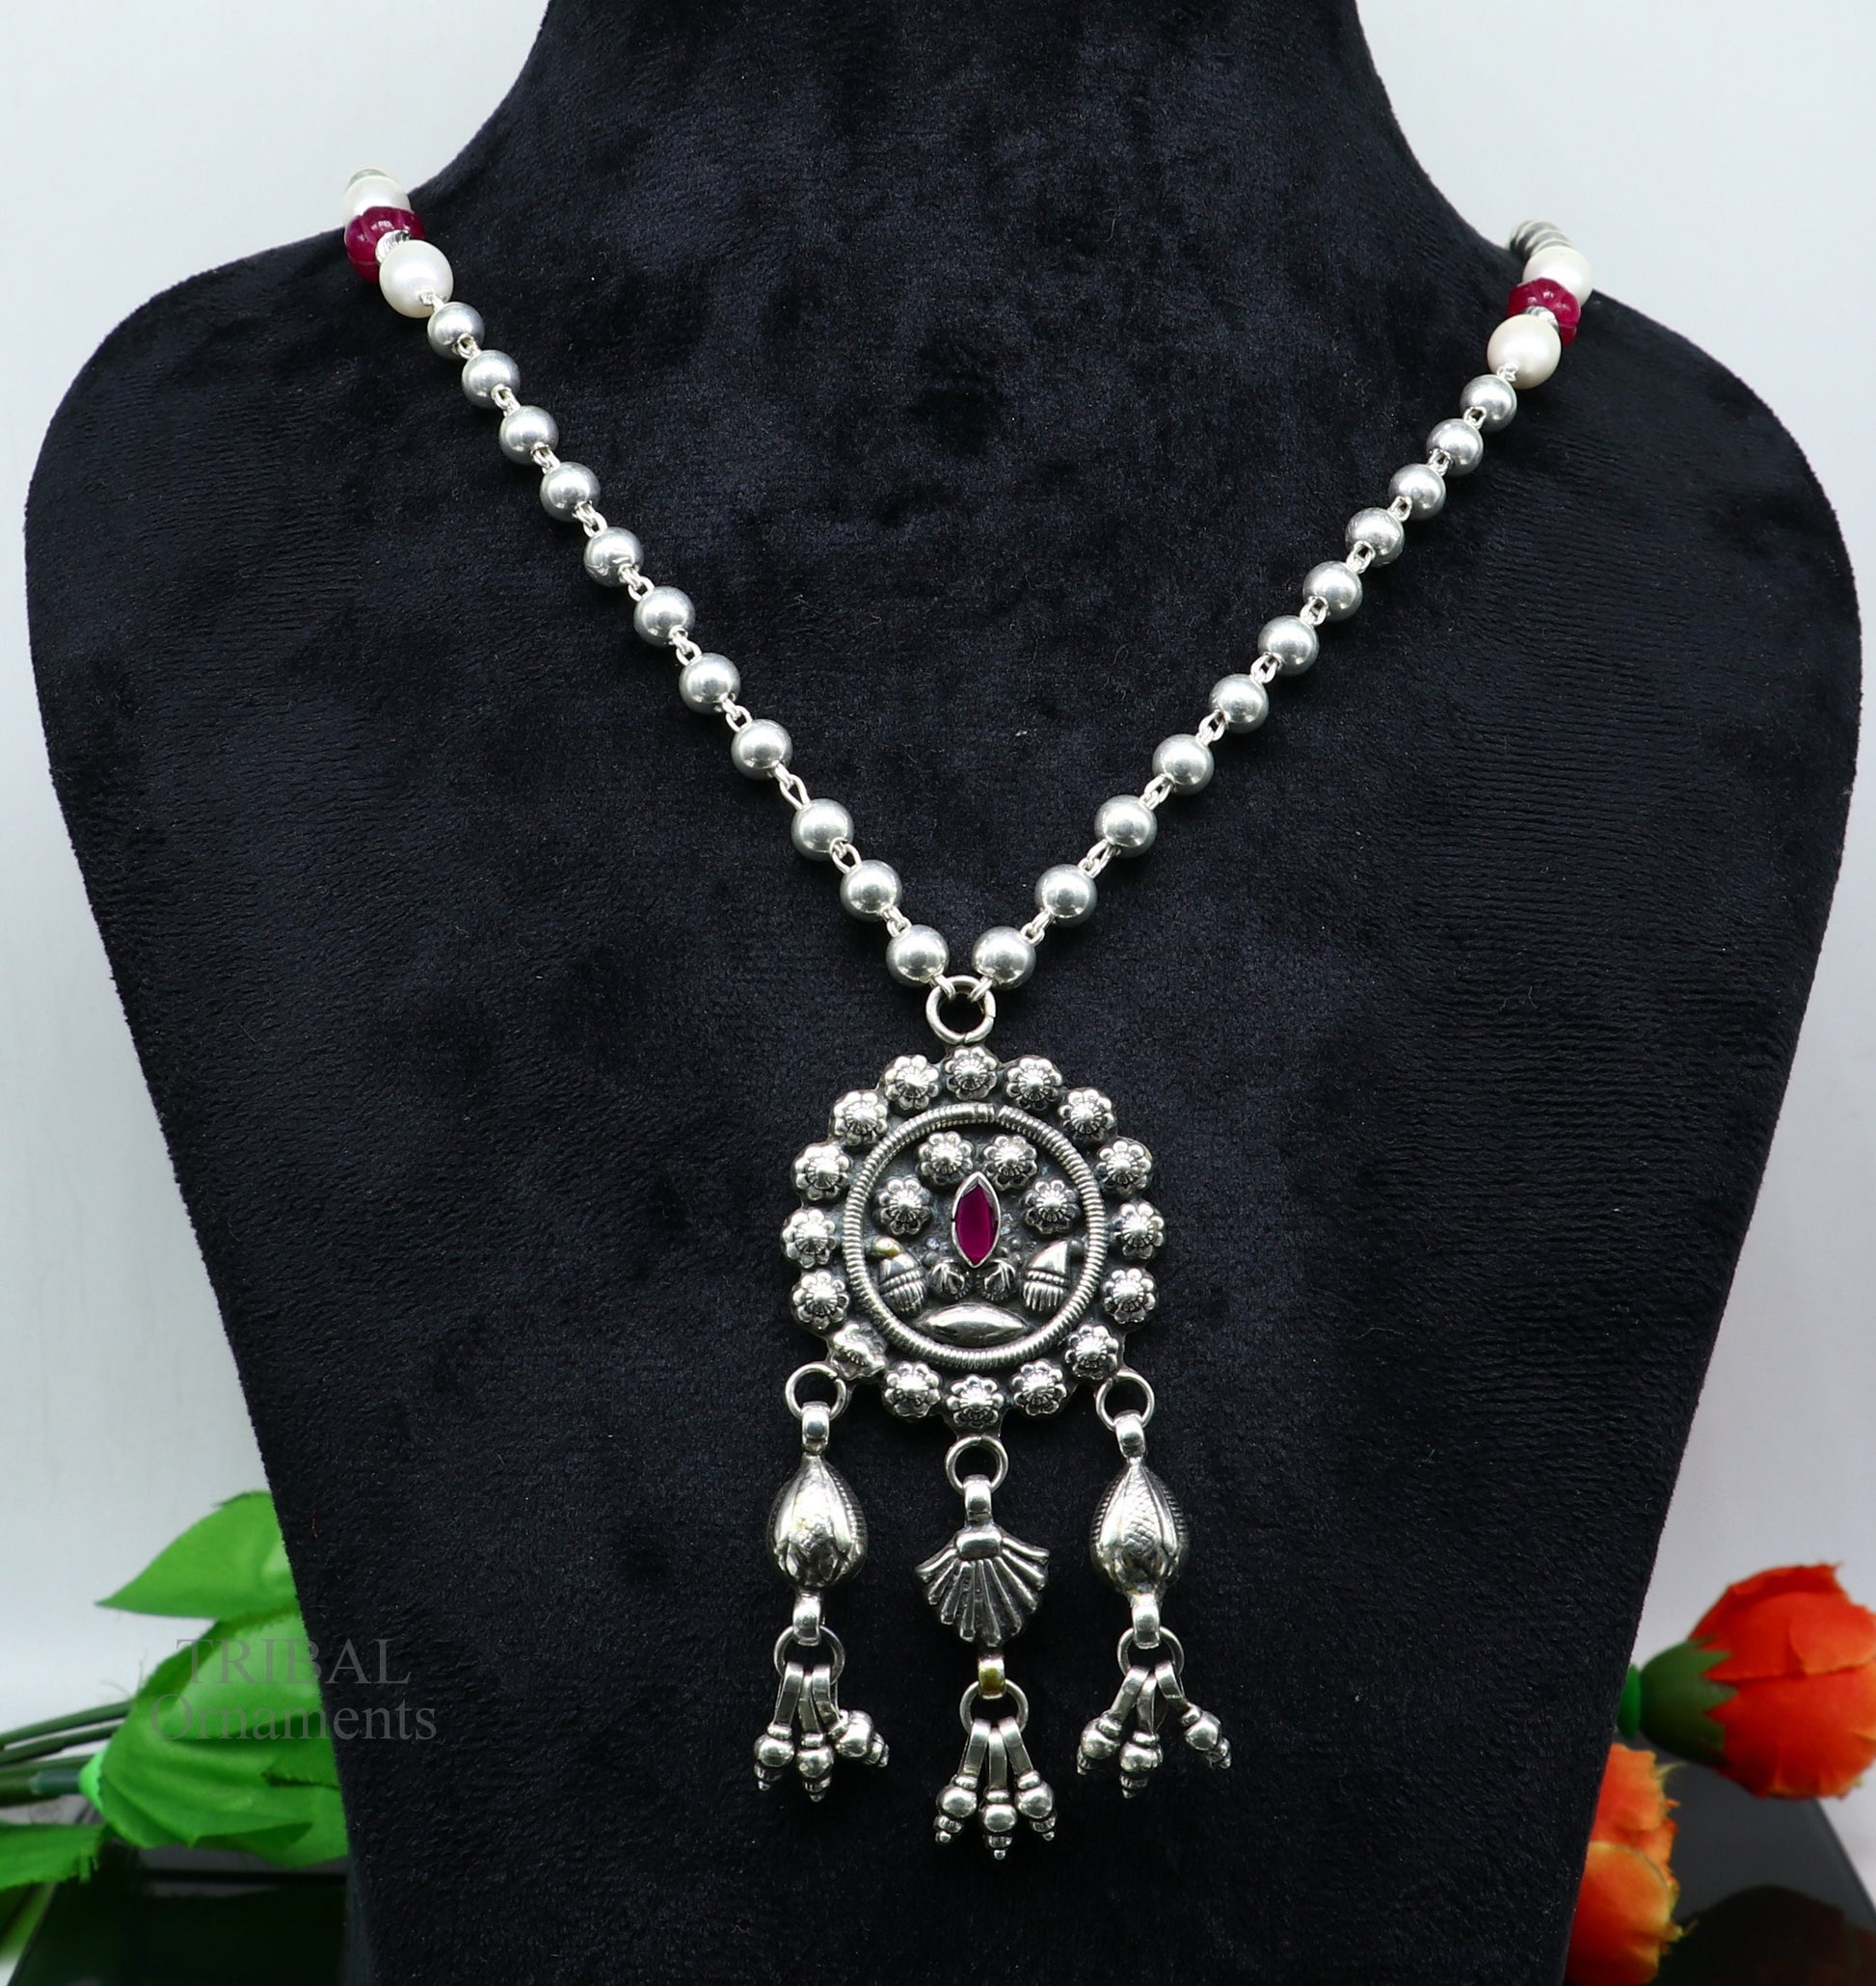 Awesome 925 sterling silver beads chain necklace, gorgeous flower design pendant, traditional style brides mangalsutra necklace nec357 - TRIBAL ORNAMENTS